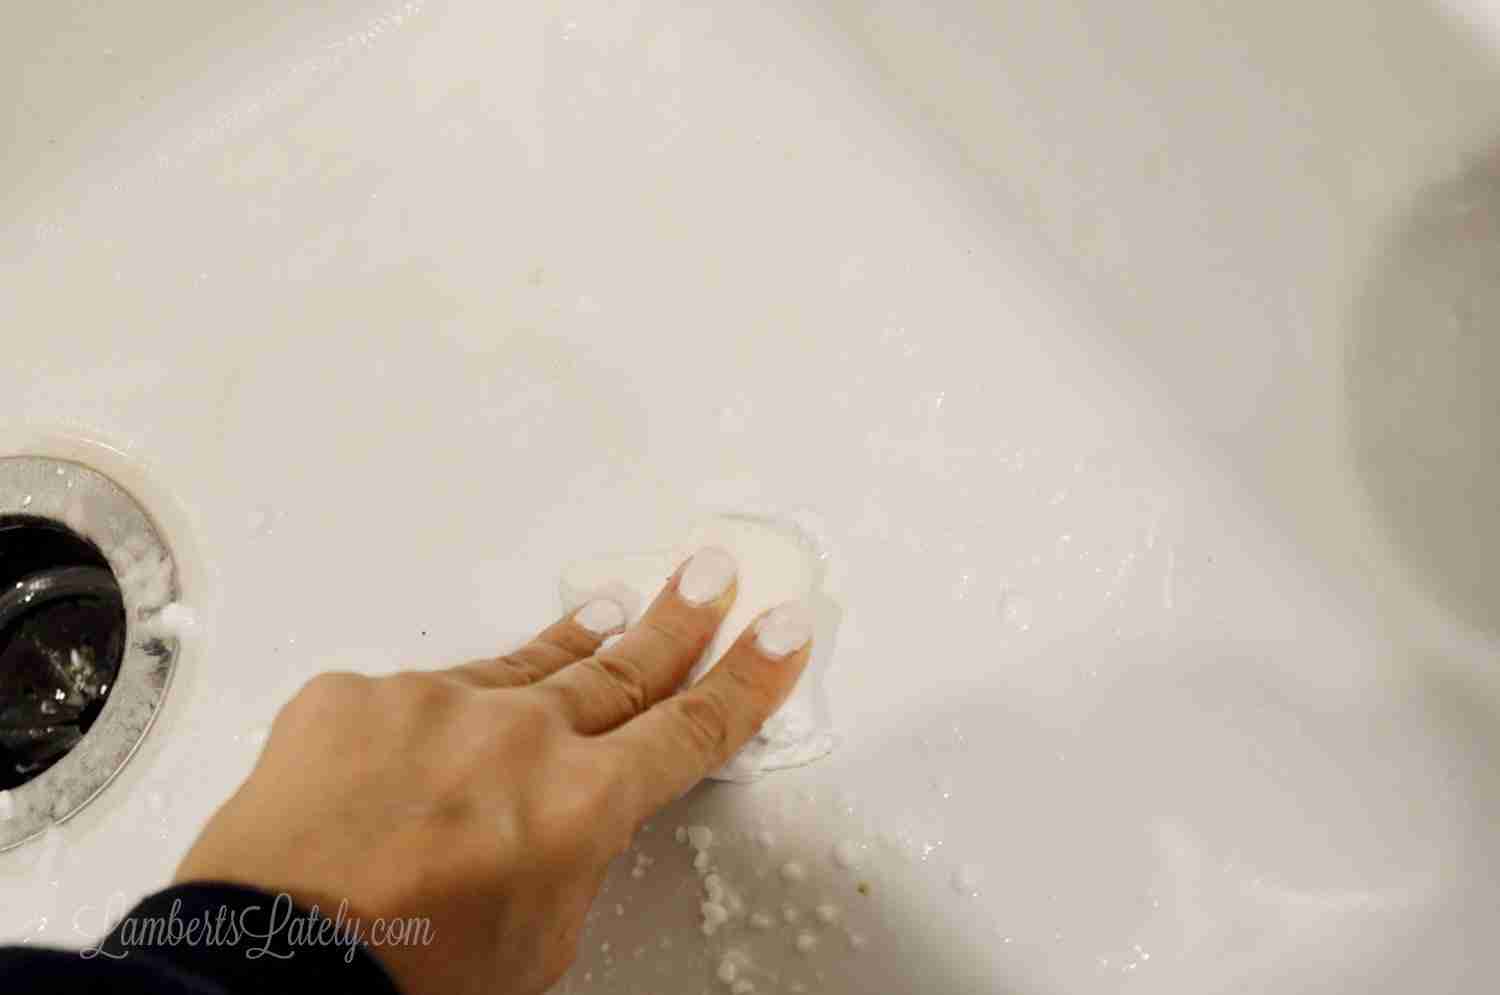 how to clean a porcelain sink - scrub with melamine sponge